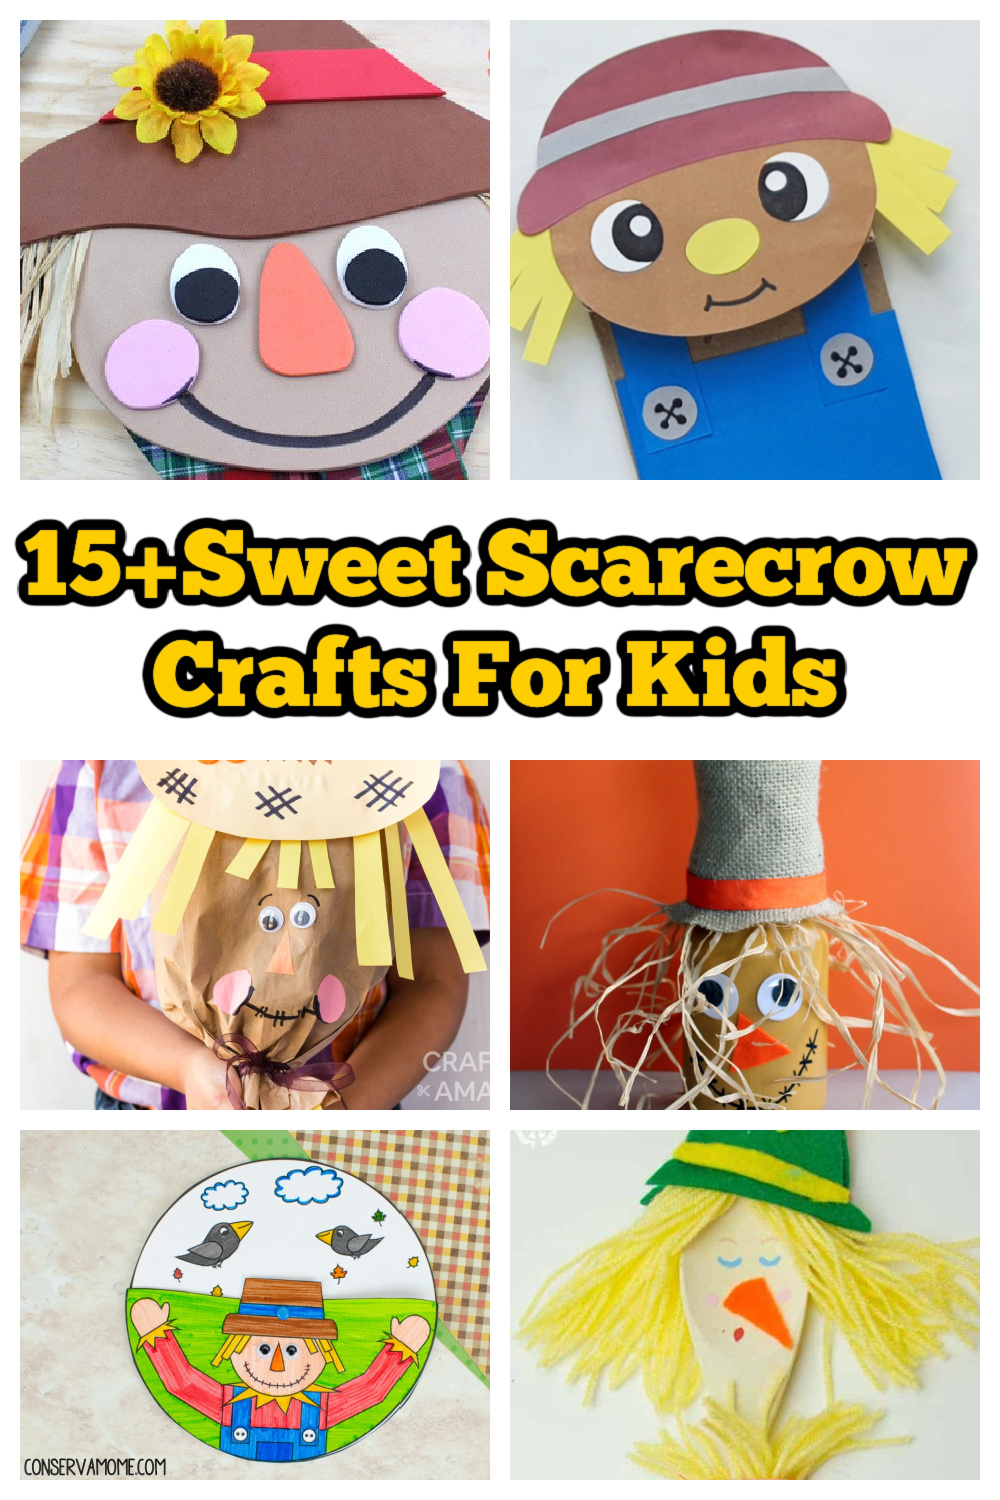 15+Sweet Scarecrow Crafts For Kids